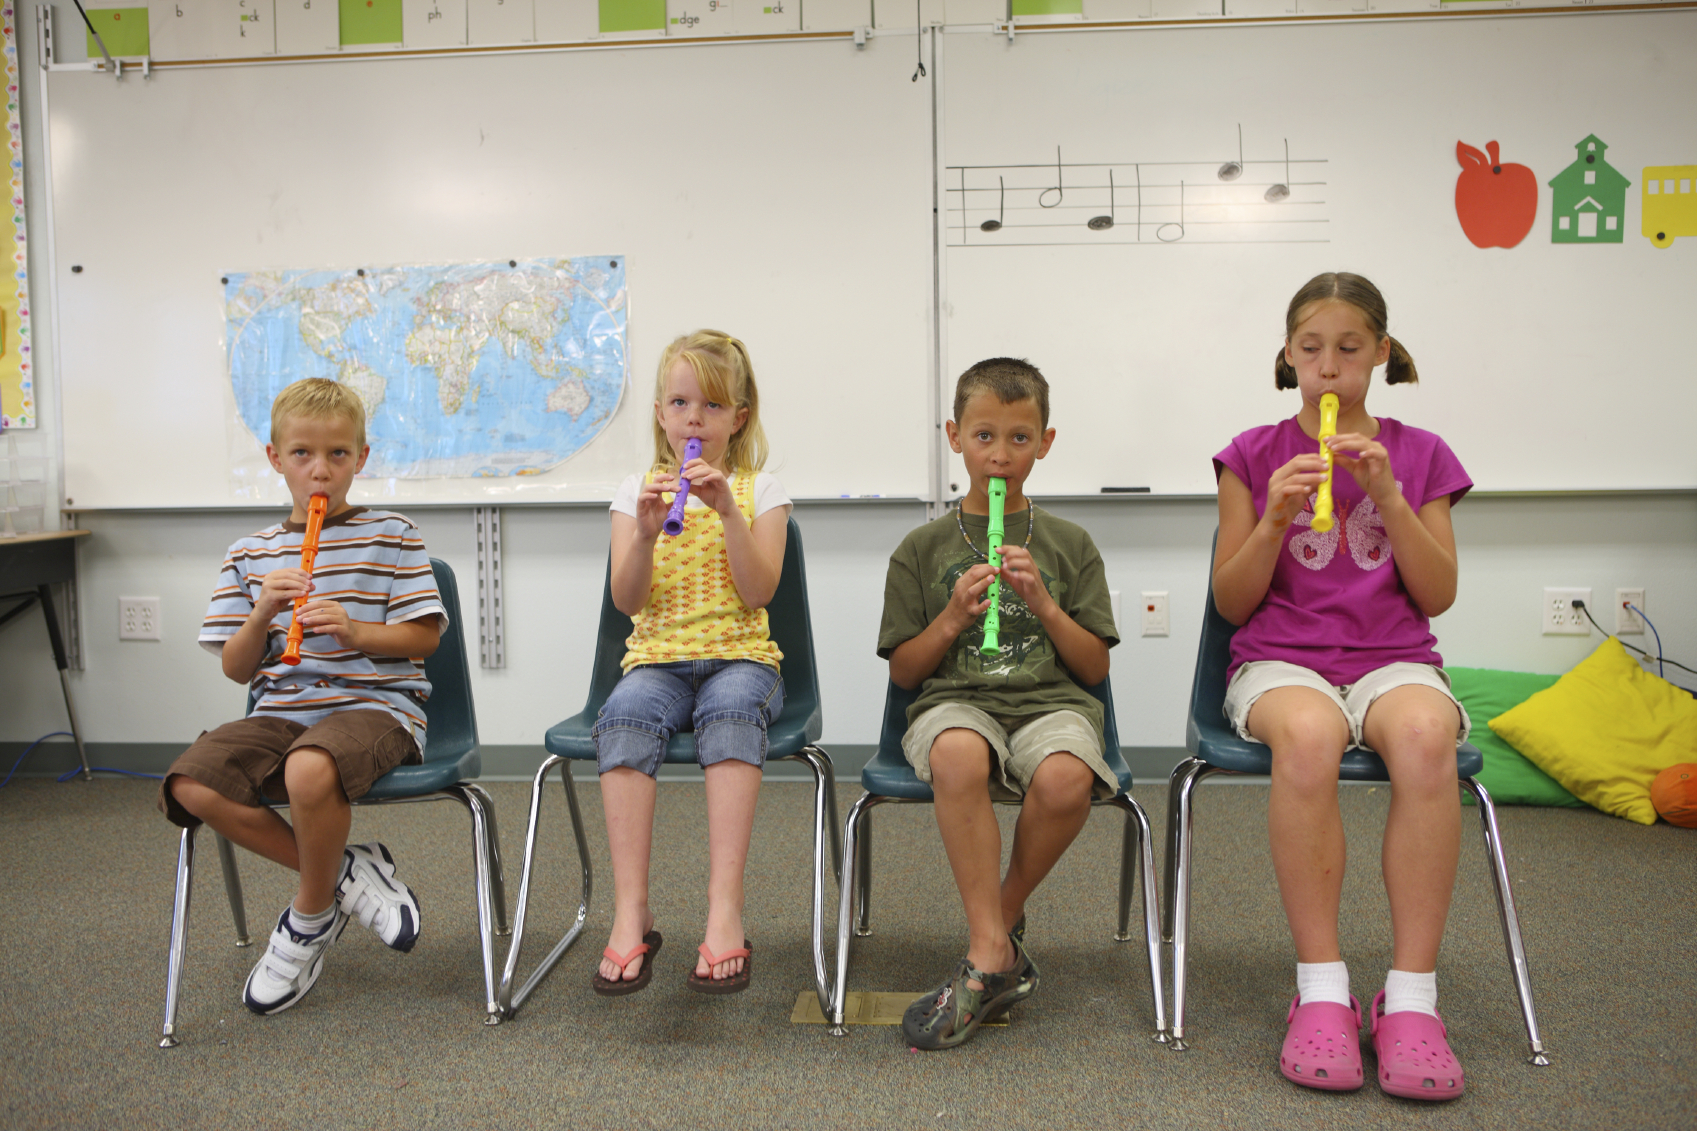 Music Education in Public Schools: Various Programs and Benefits